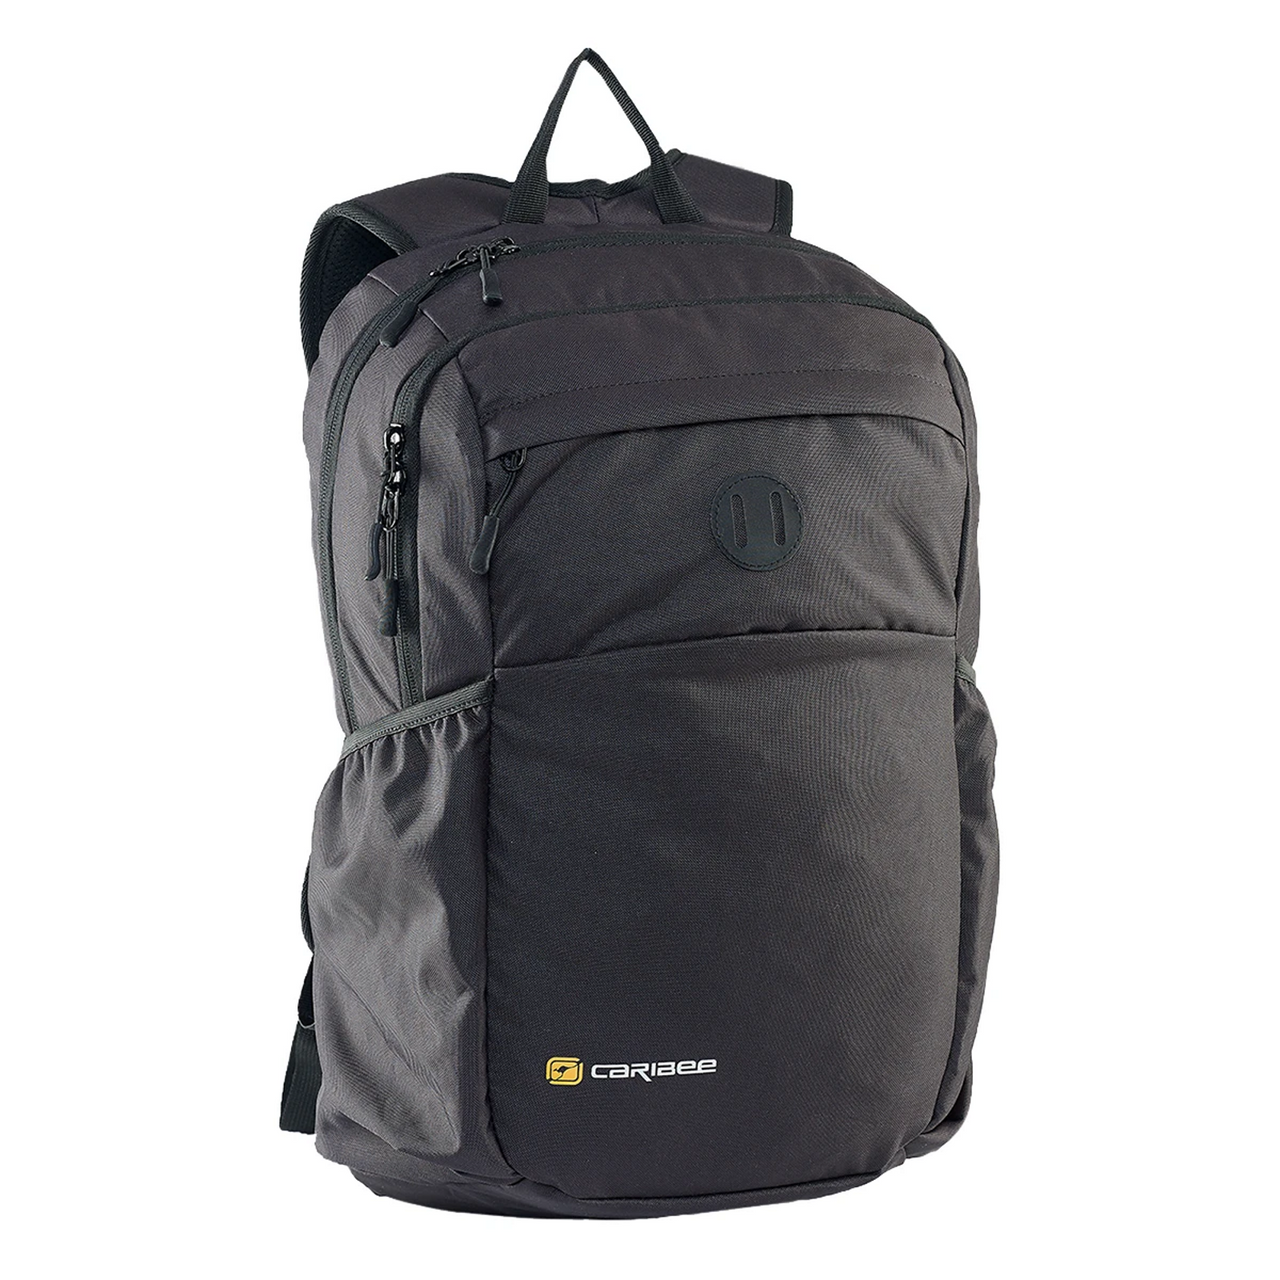 Caribee Cub 28L Backpack at Luggage Superstore